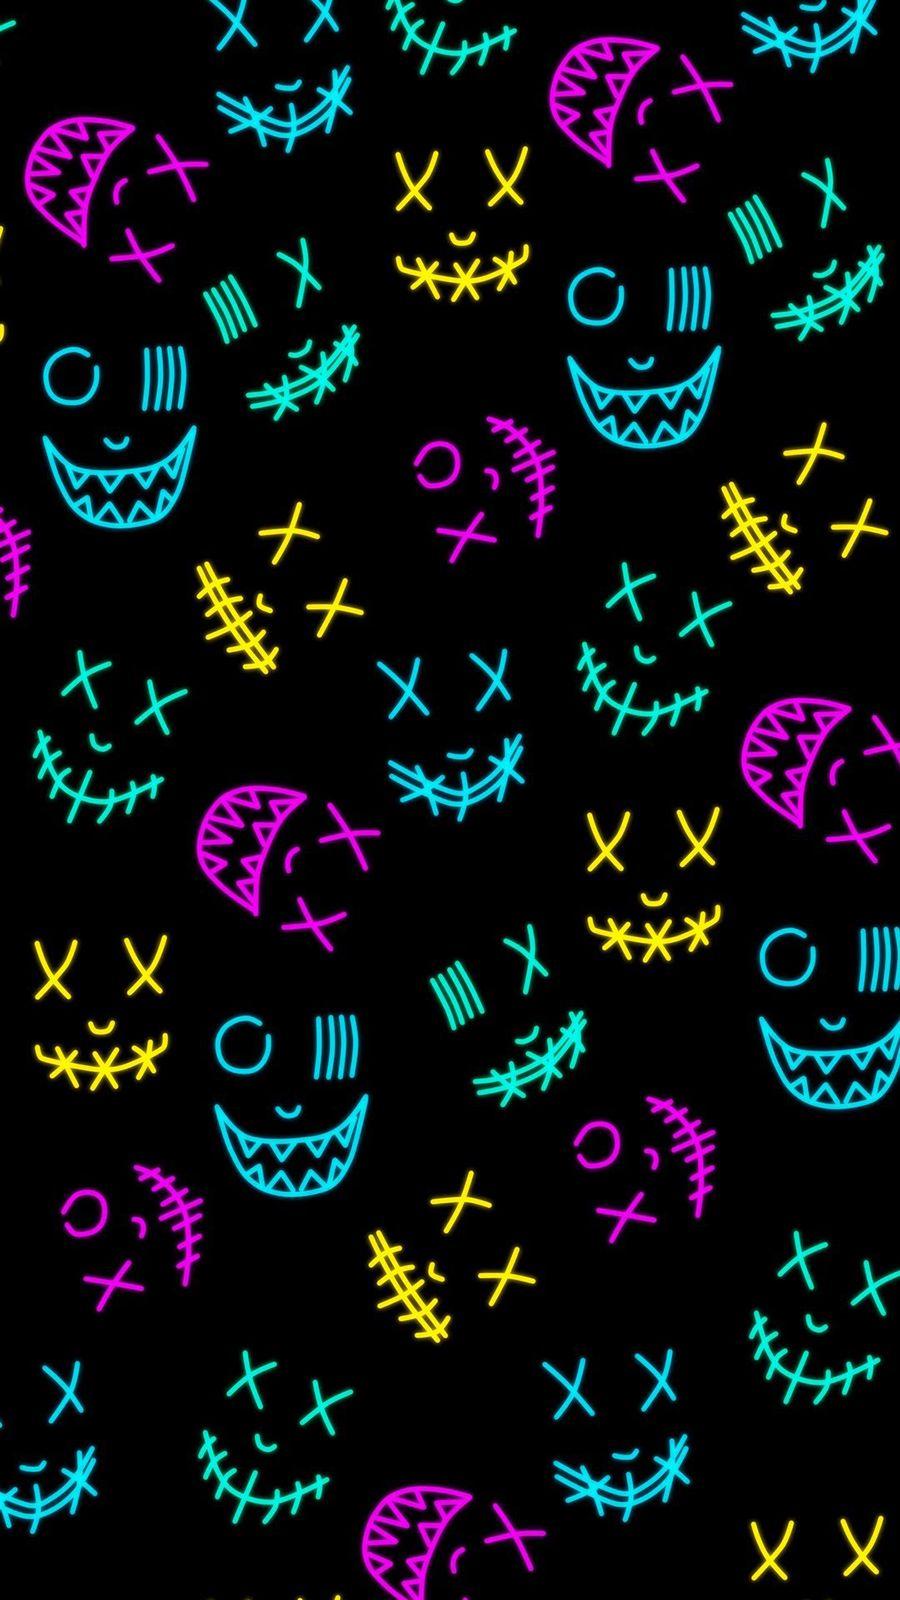 Trippy Smiley Face Wallpaper